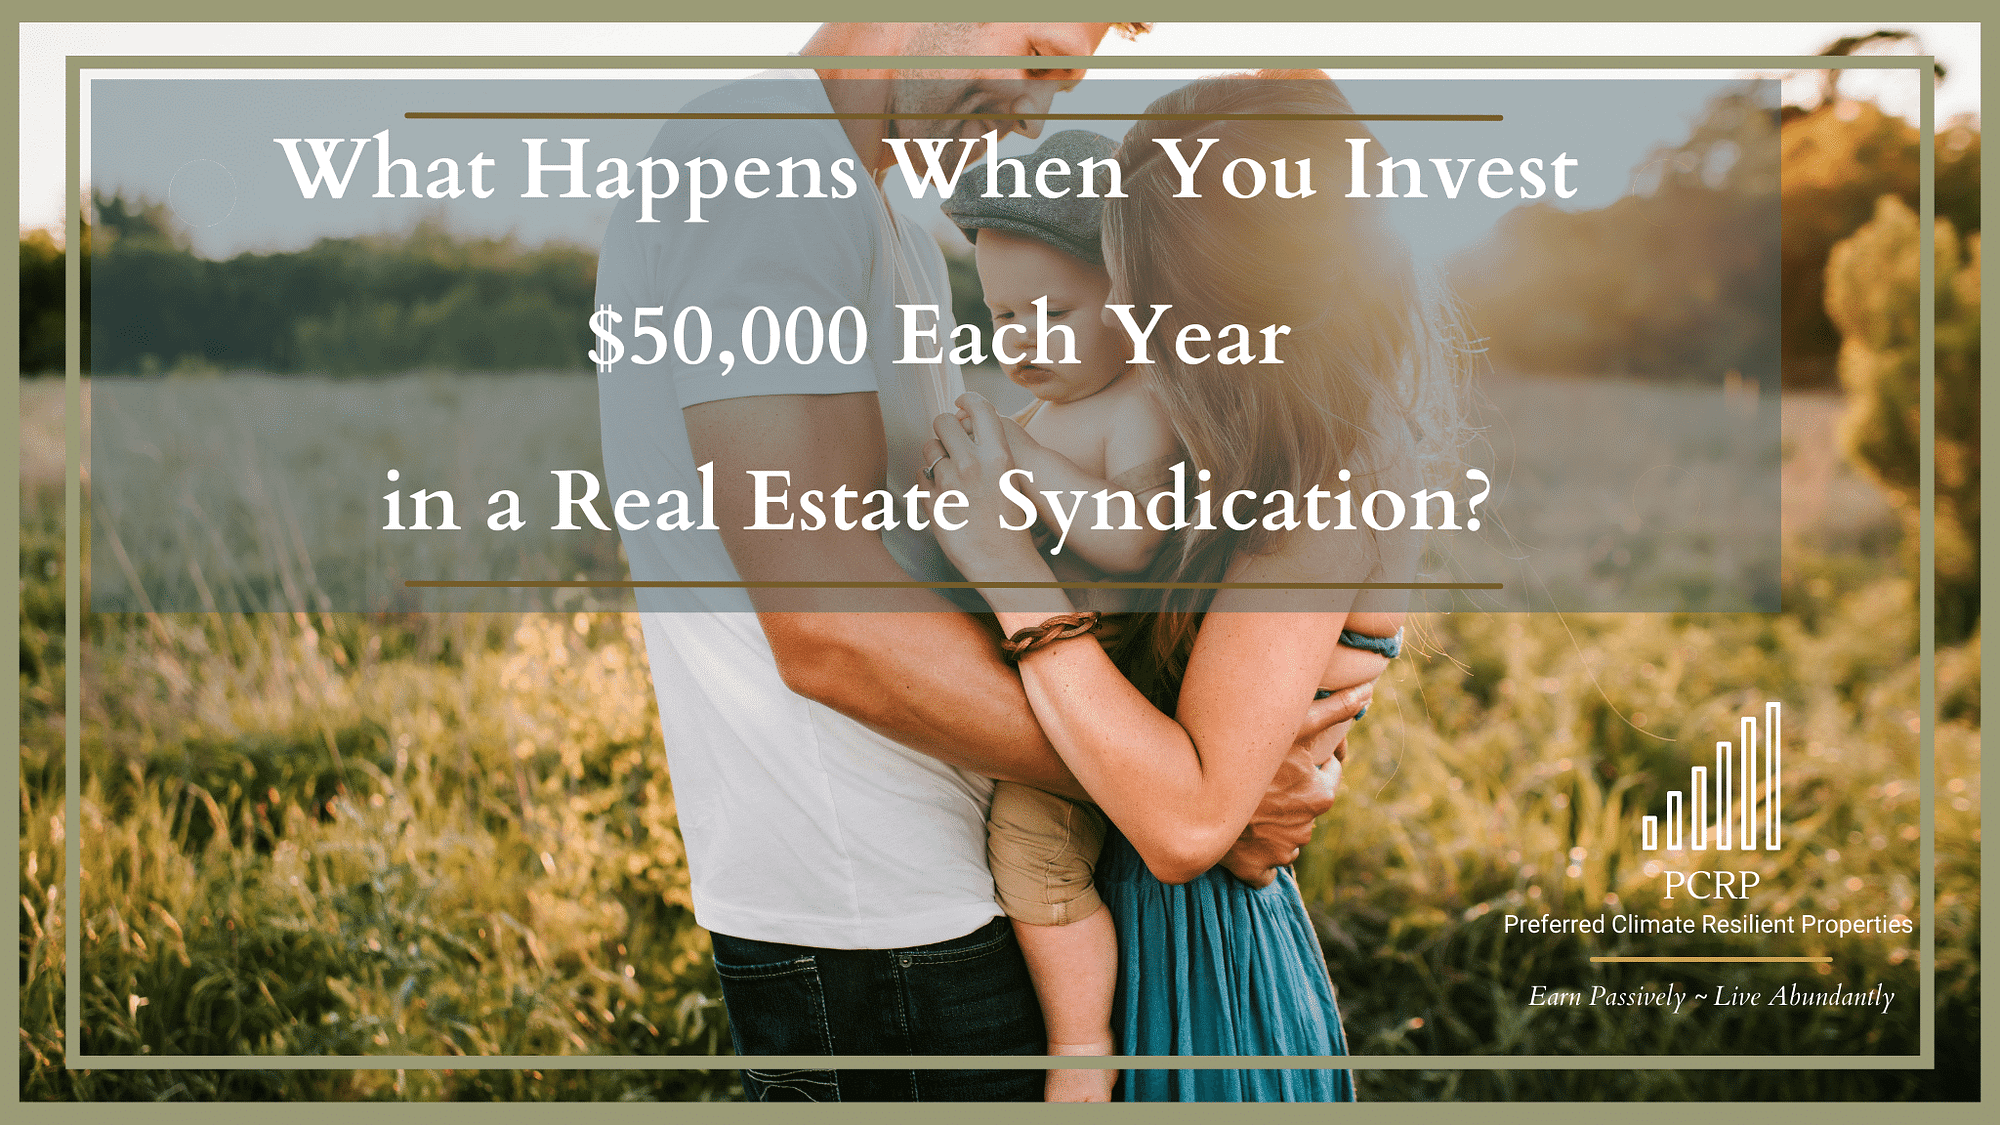 What happens when you invest $50,000 each year in a real estate syndication